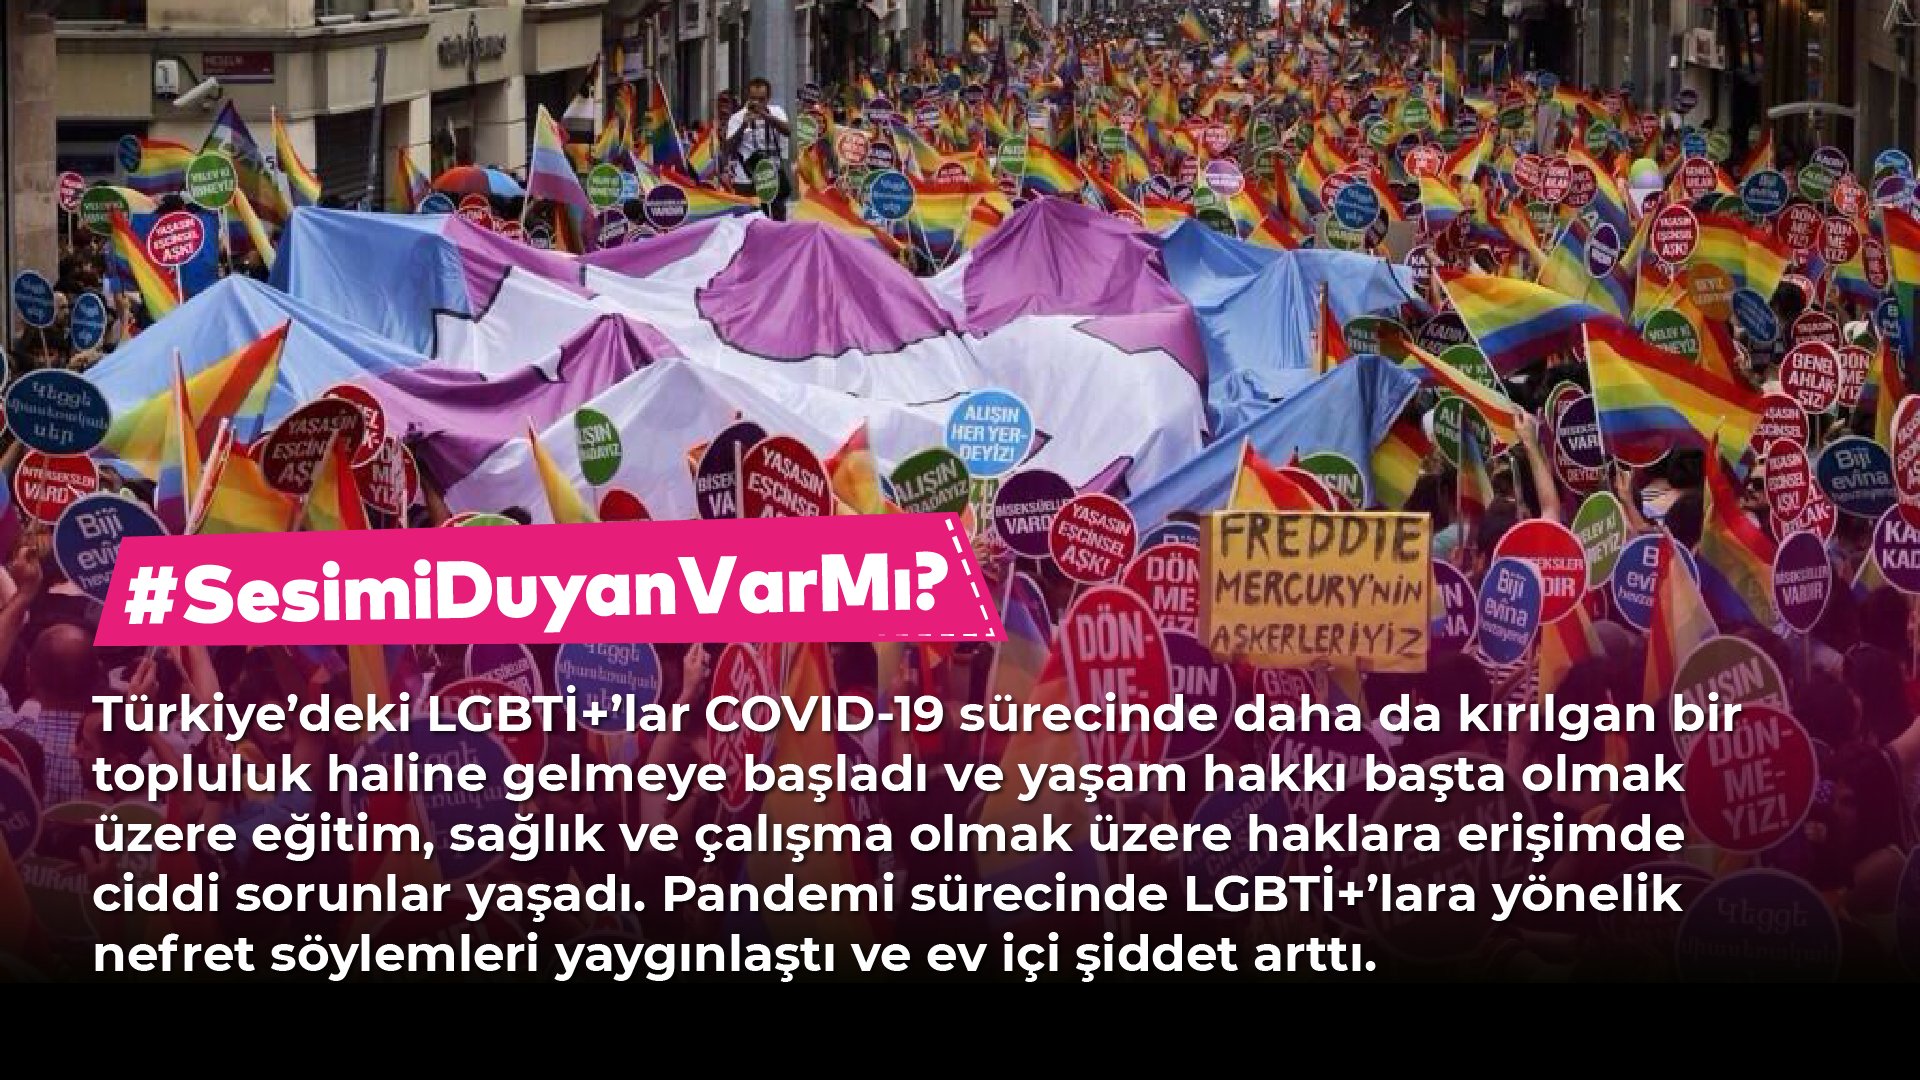 “Can Anyone Hear Me?” campaign from Peoples’ Democratic Party (HDP) | Kaos GL - News Portal for LGBTI+ News